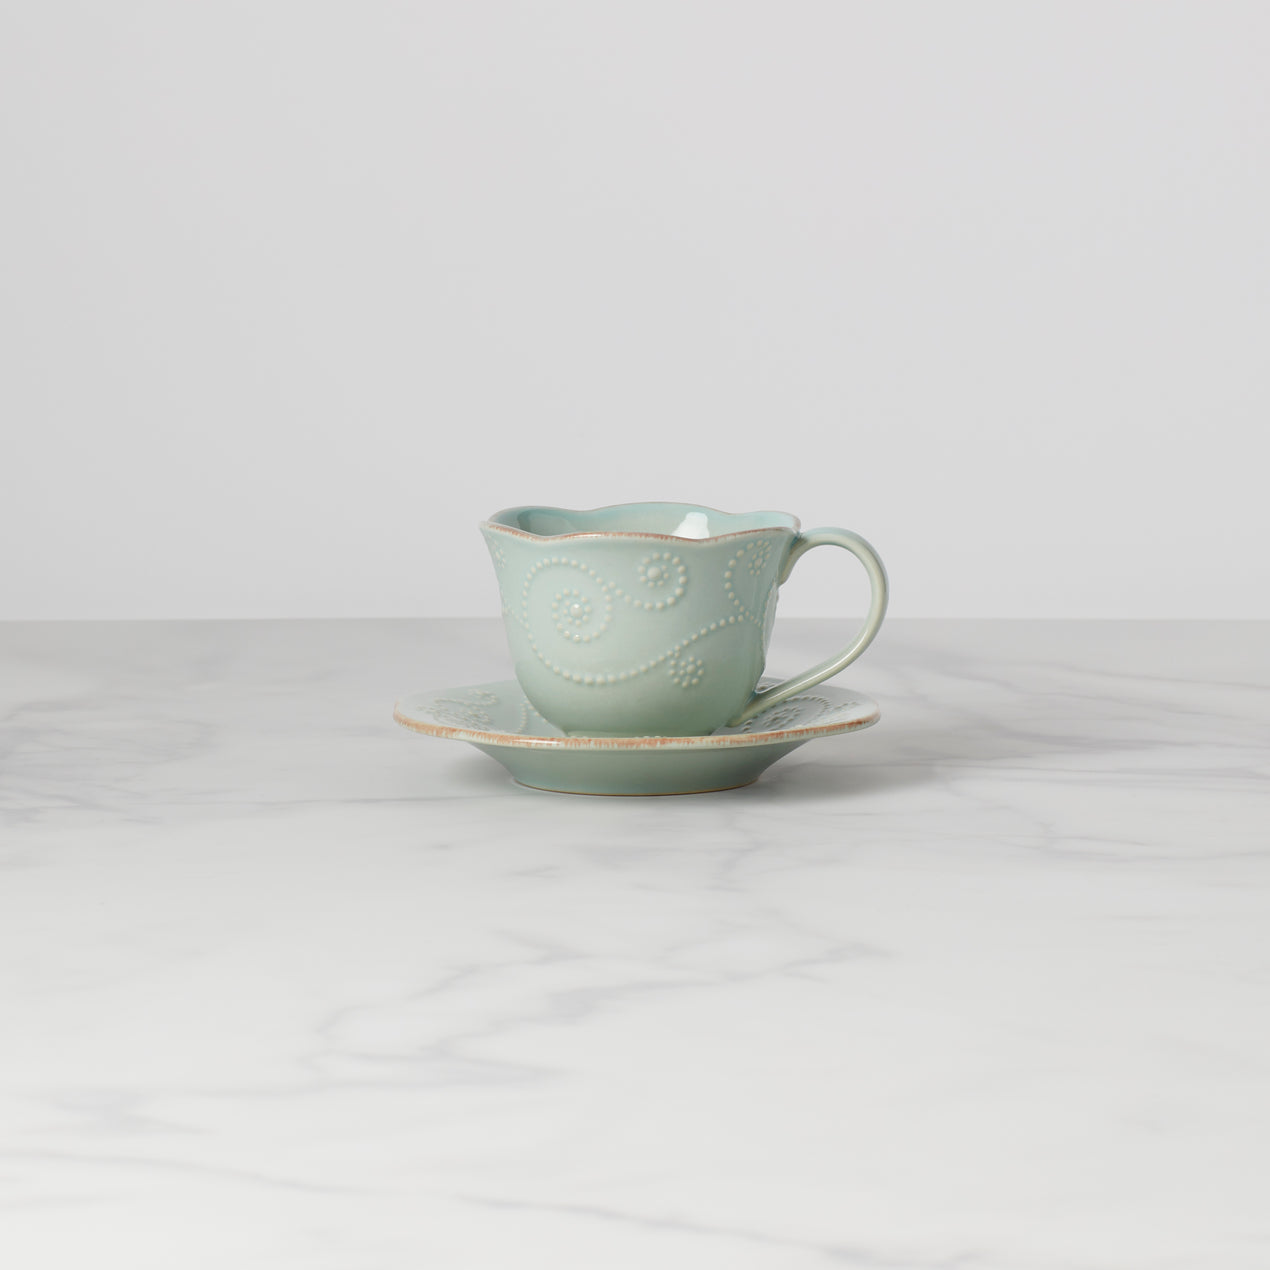 Tea Cup and Saucer Set, Large Ceramic Cup, Simple Coffee Cup and Sauce